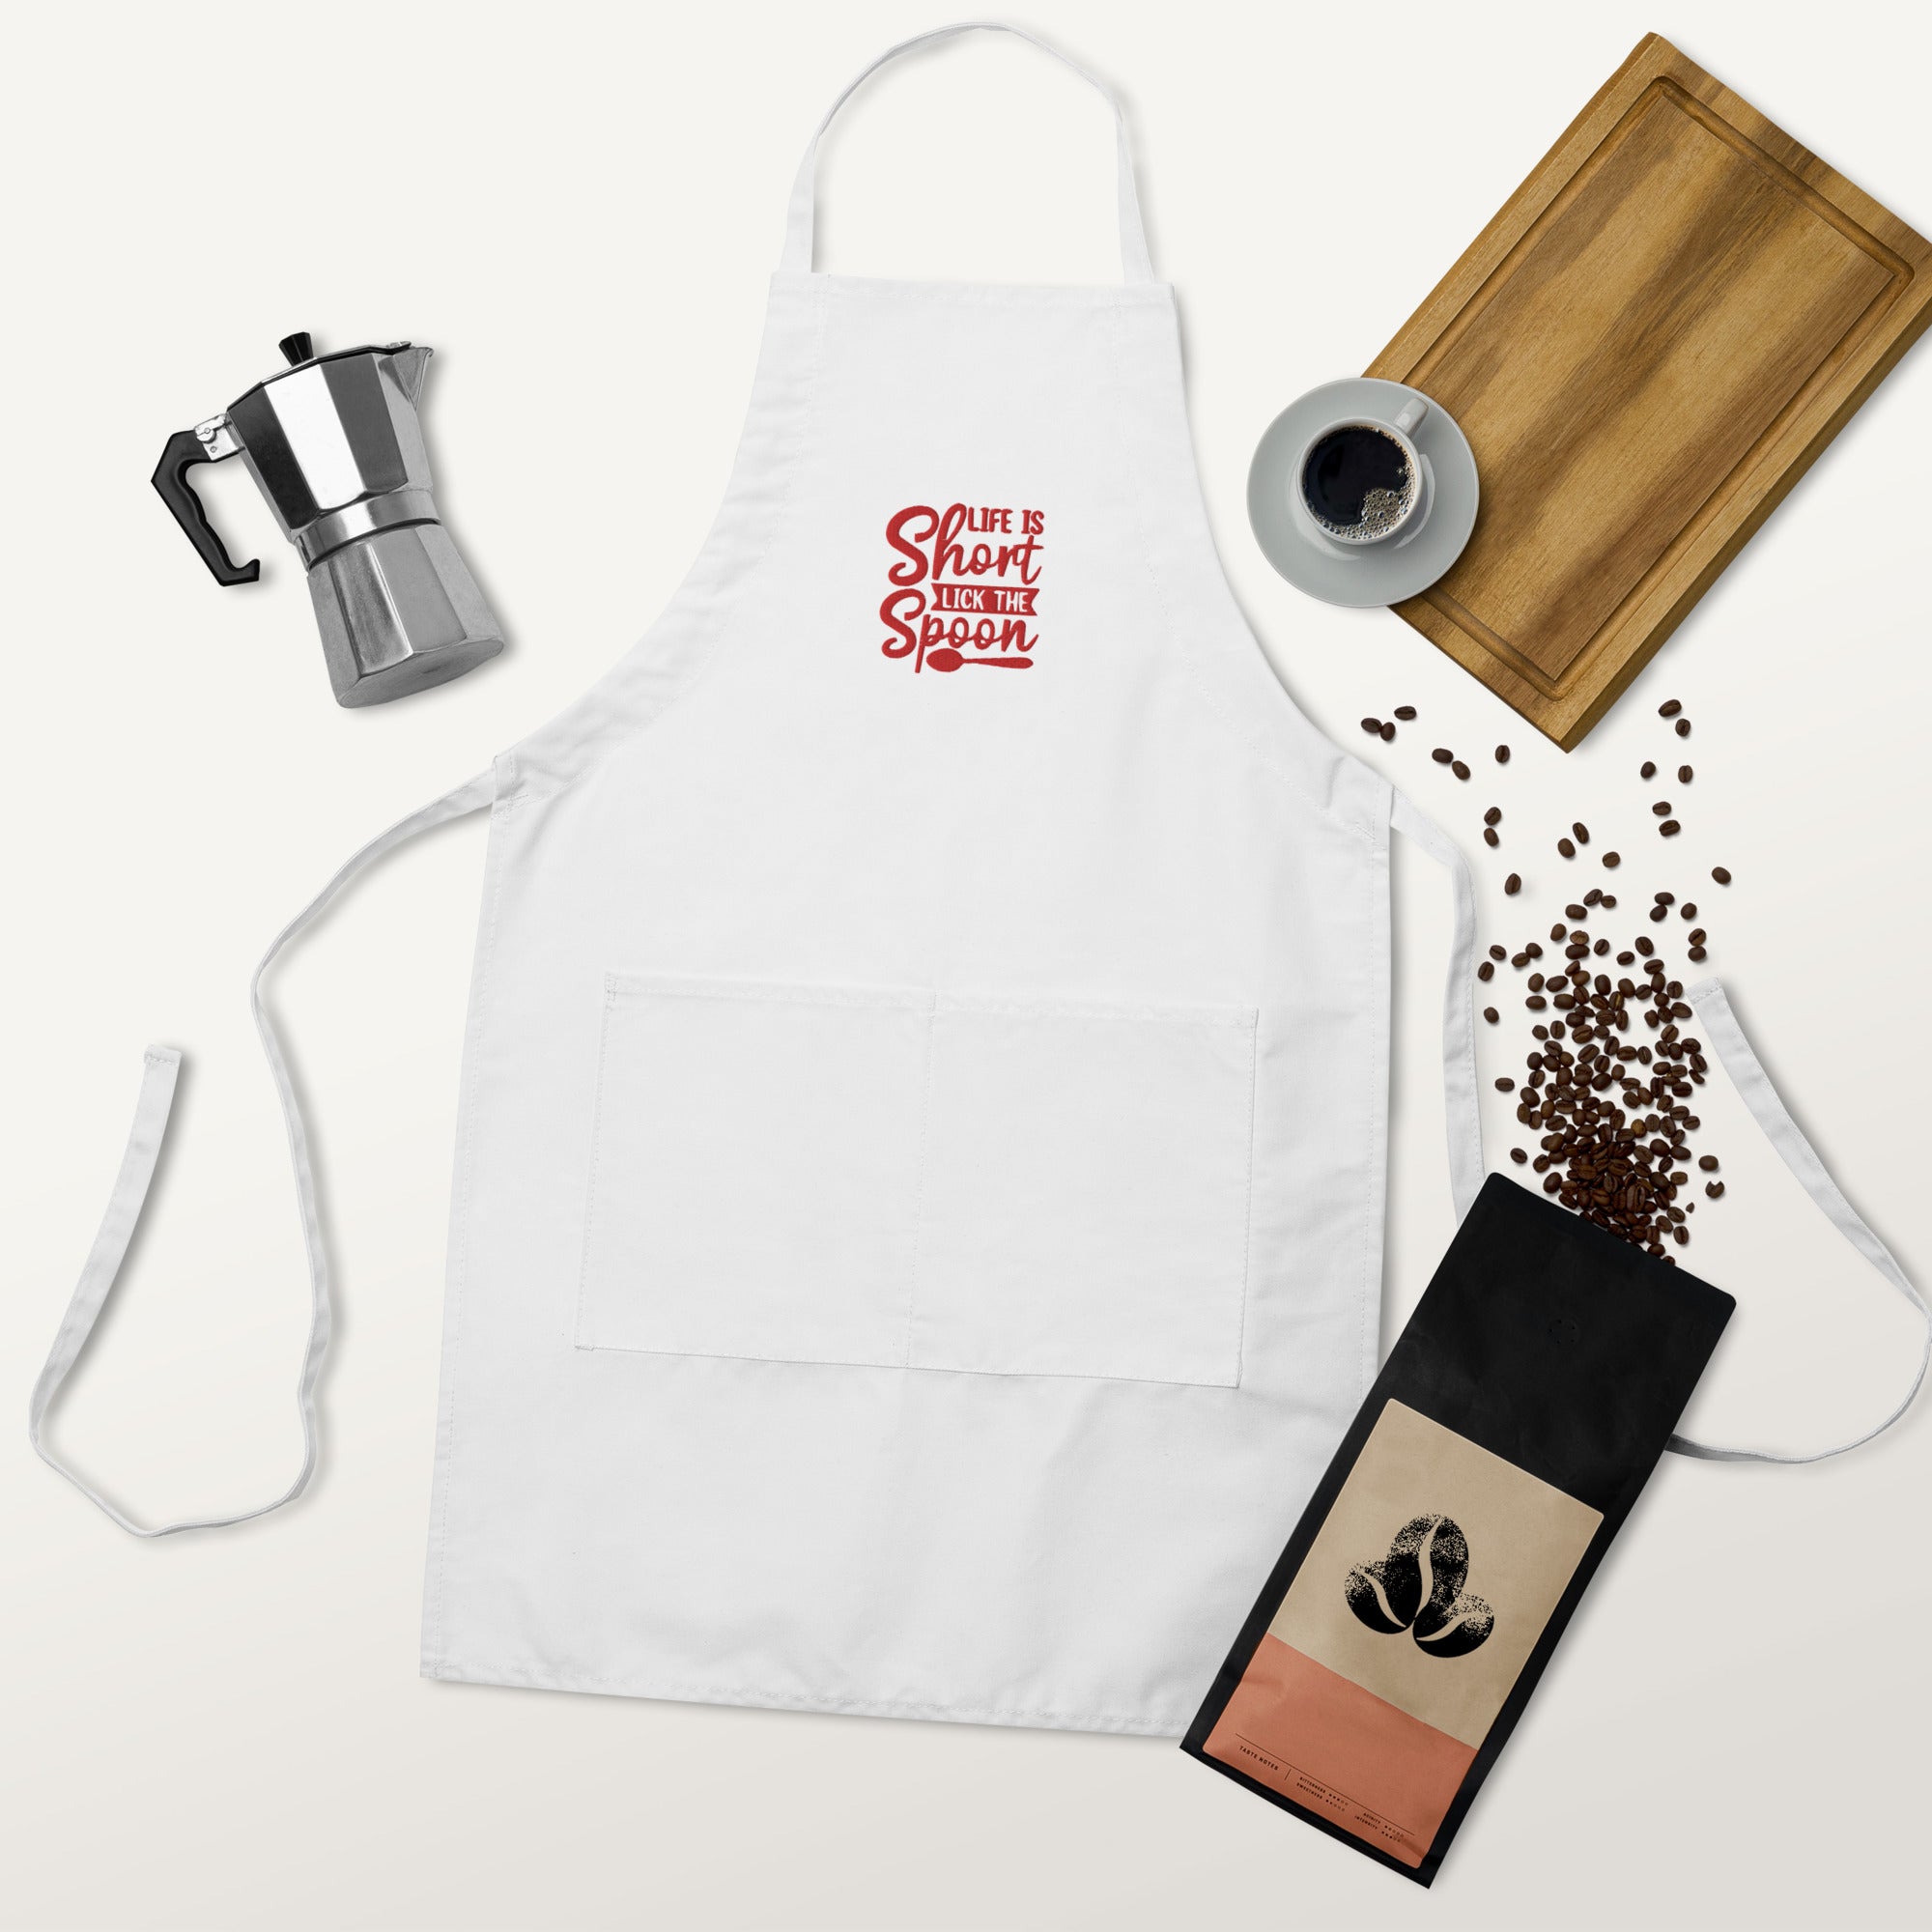 Lick the Spoon Embroidered Apron